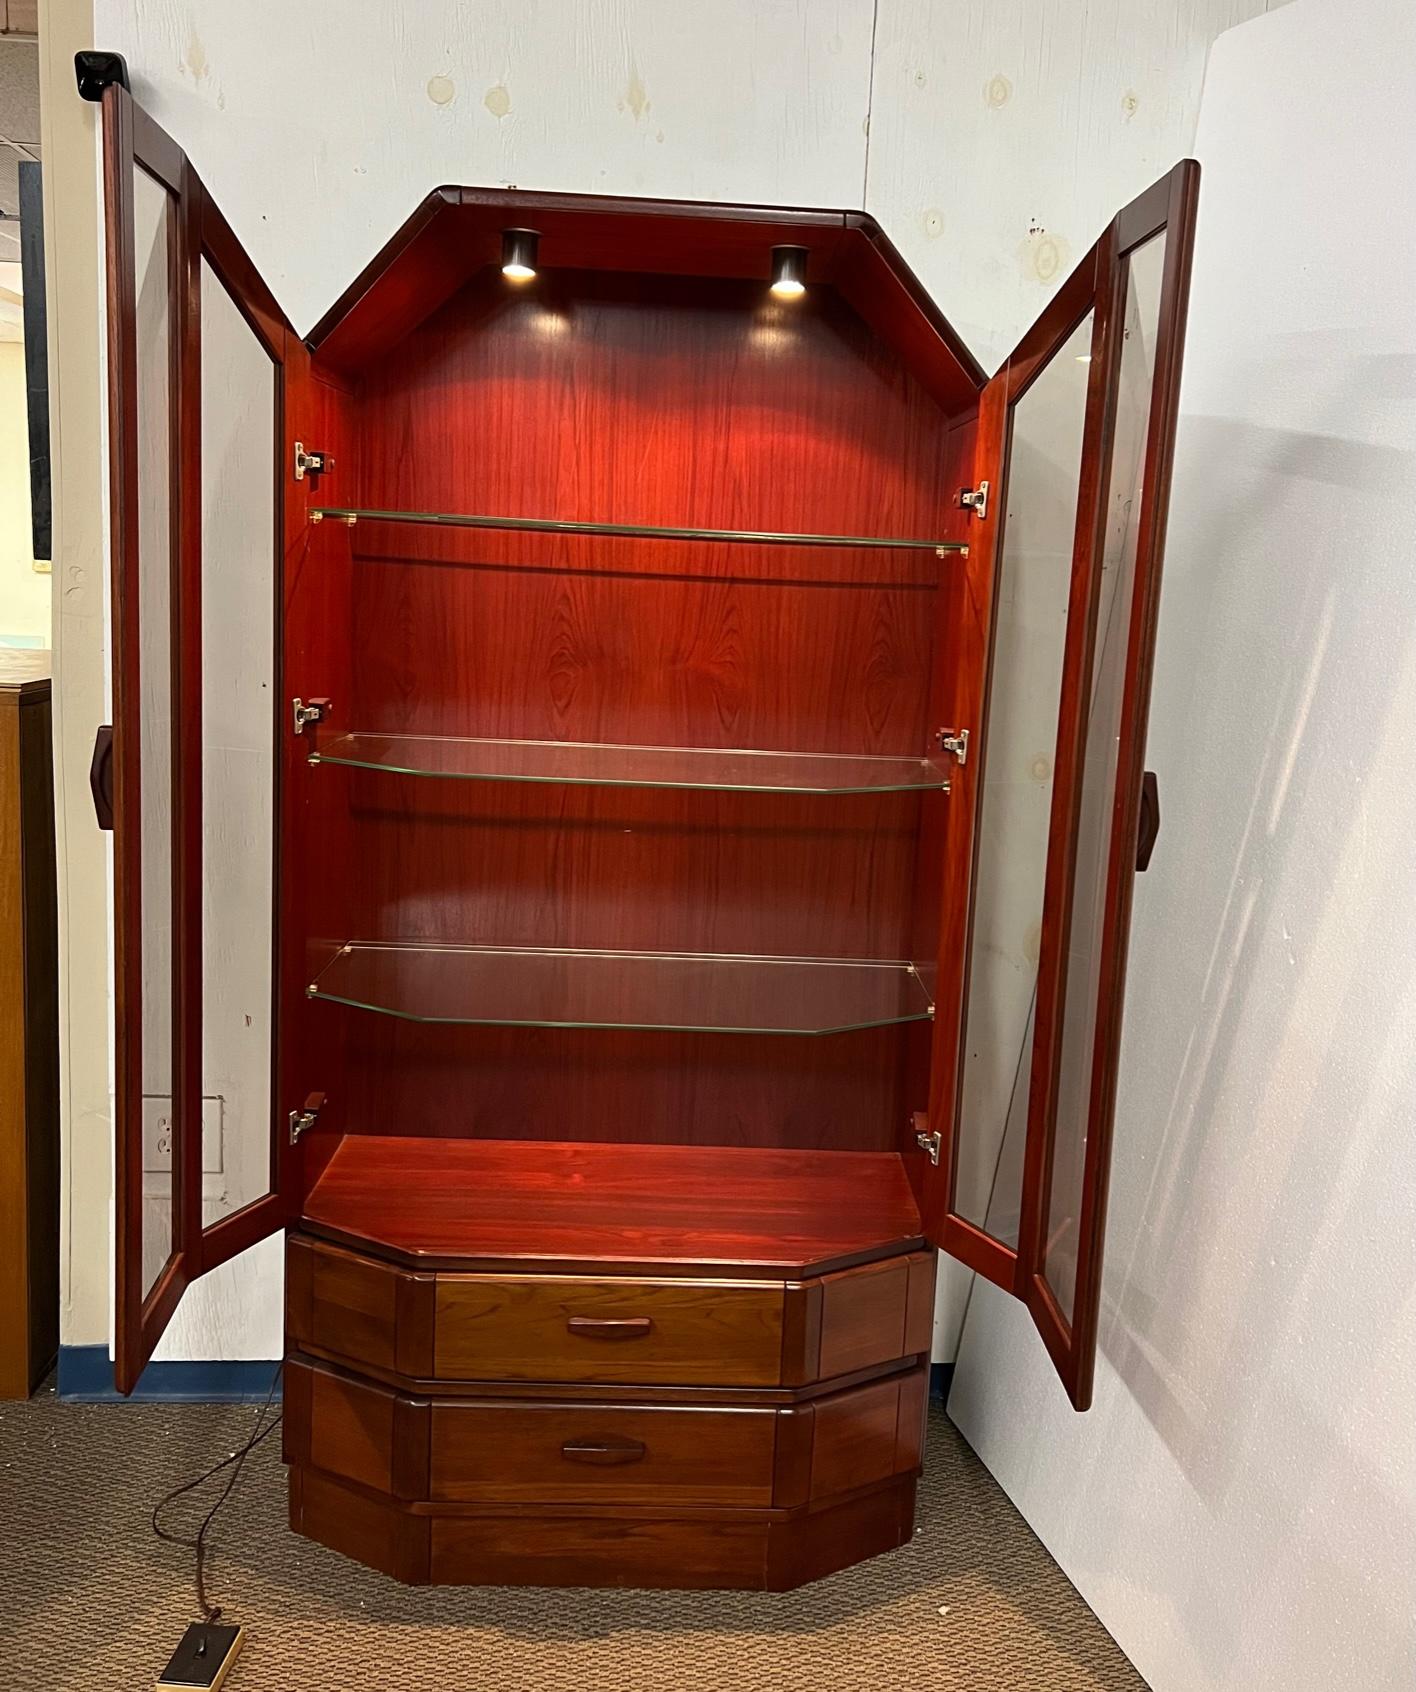 Outstanding Danish rosewood glass display cabinet. Made in Denmark. Three adjustable glass shelves. Bow Front Design. A small light at the top that gives off a cozy glow.
Excellent condition. Minor marks here and there. The plug needs